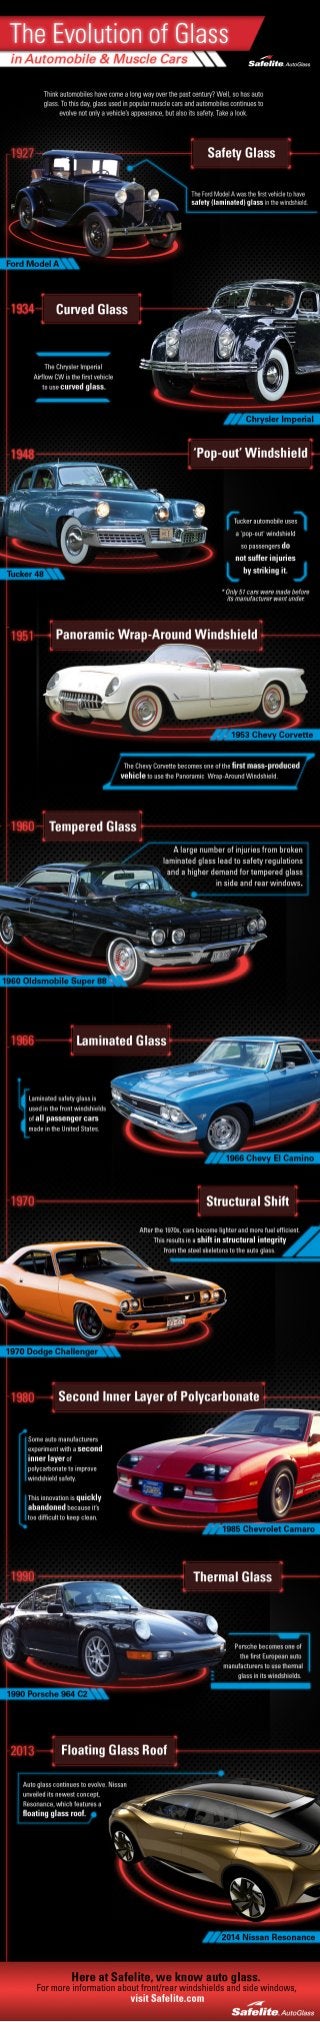 The Evolution of Auto Glass in Muscle Cars